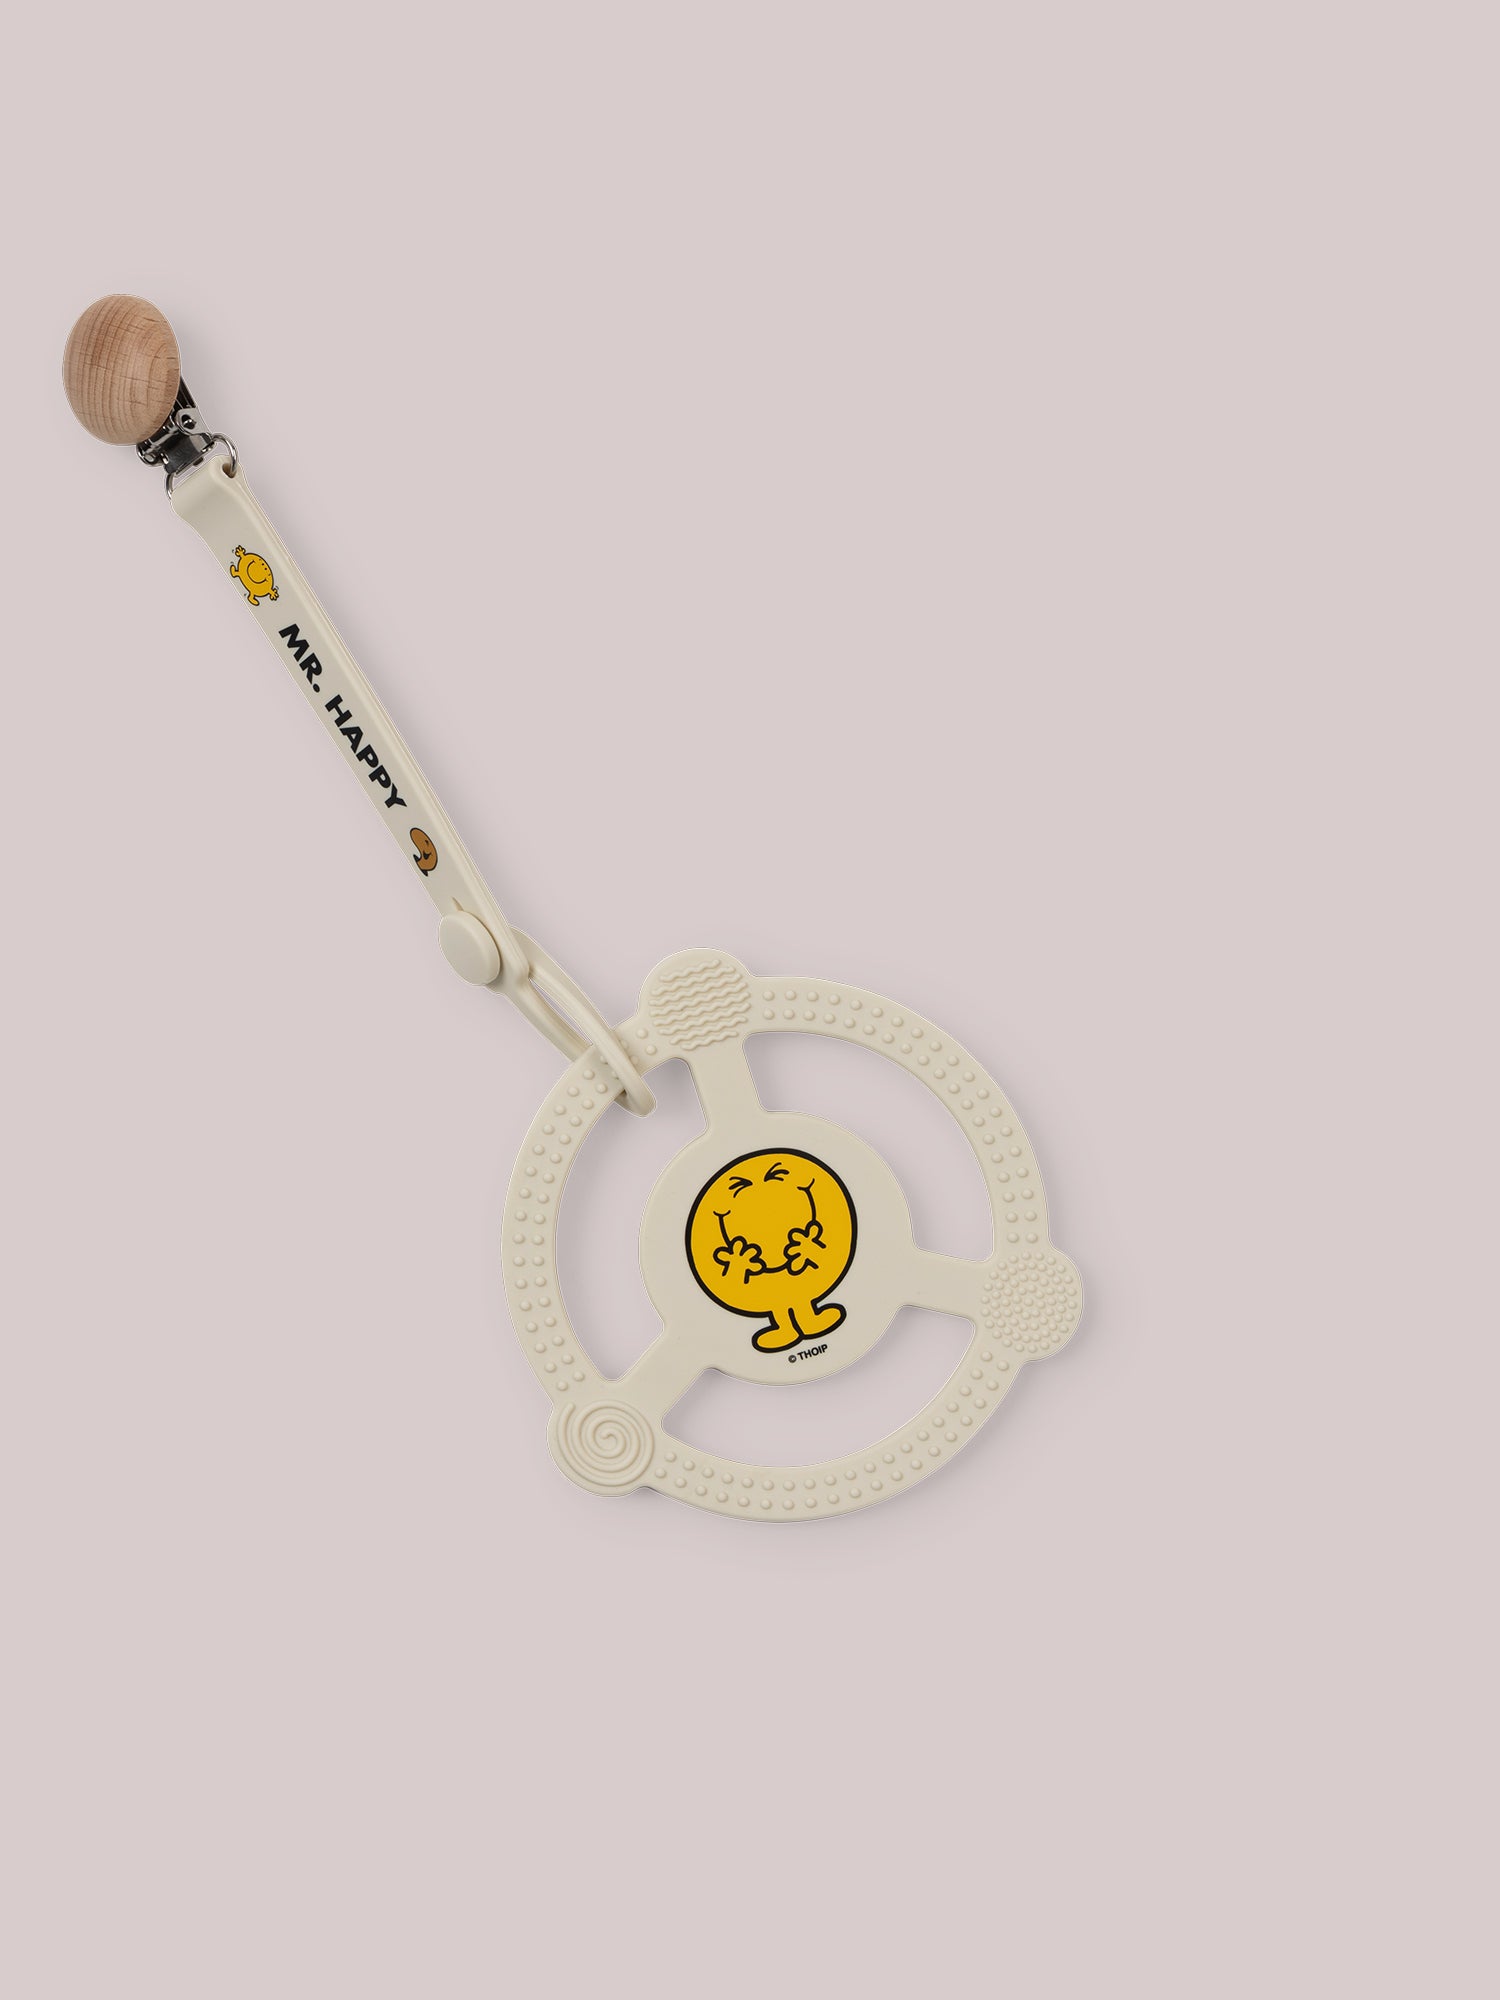 Mr. happy Silicone Teether Ring with clip attached